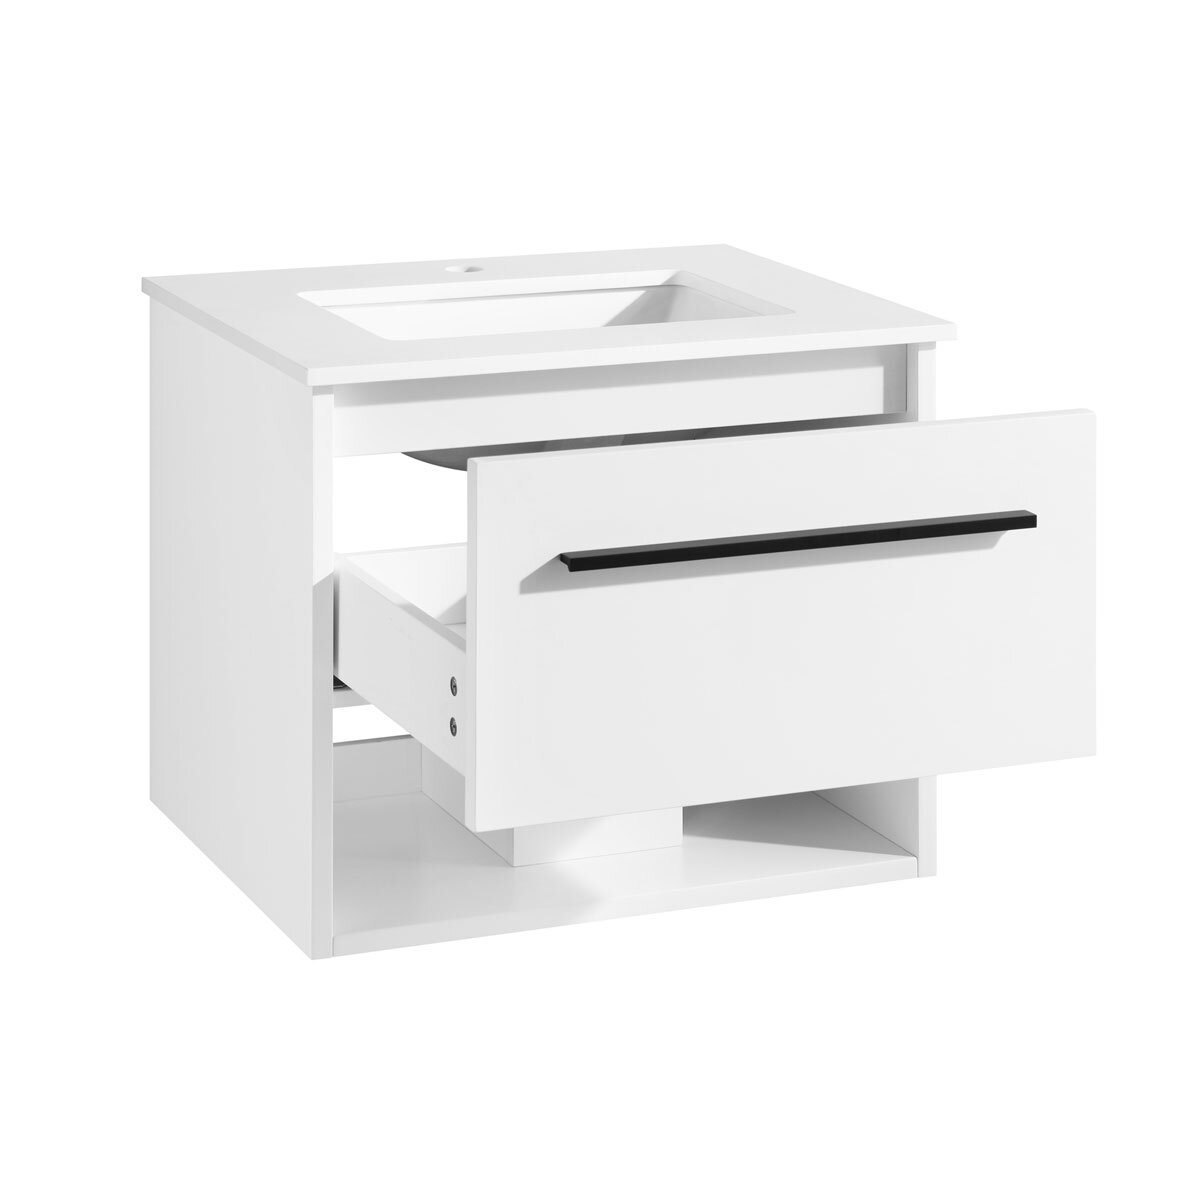 Angled image of OVE Camila 610mm in matte white on white background with drawers open